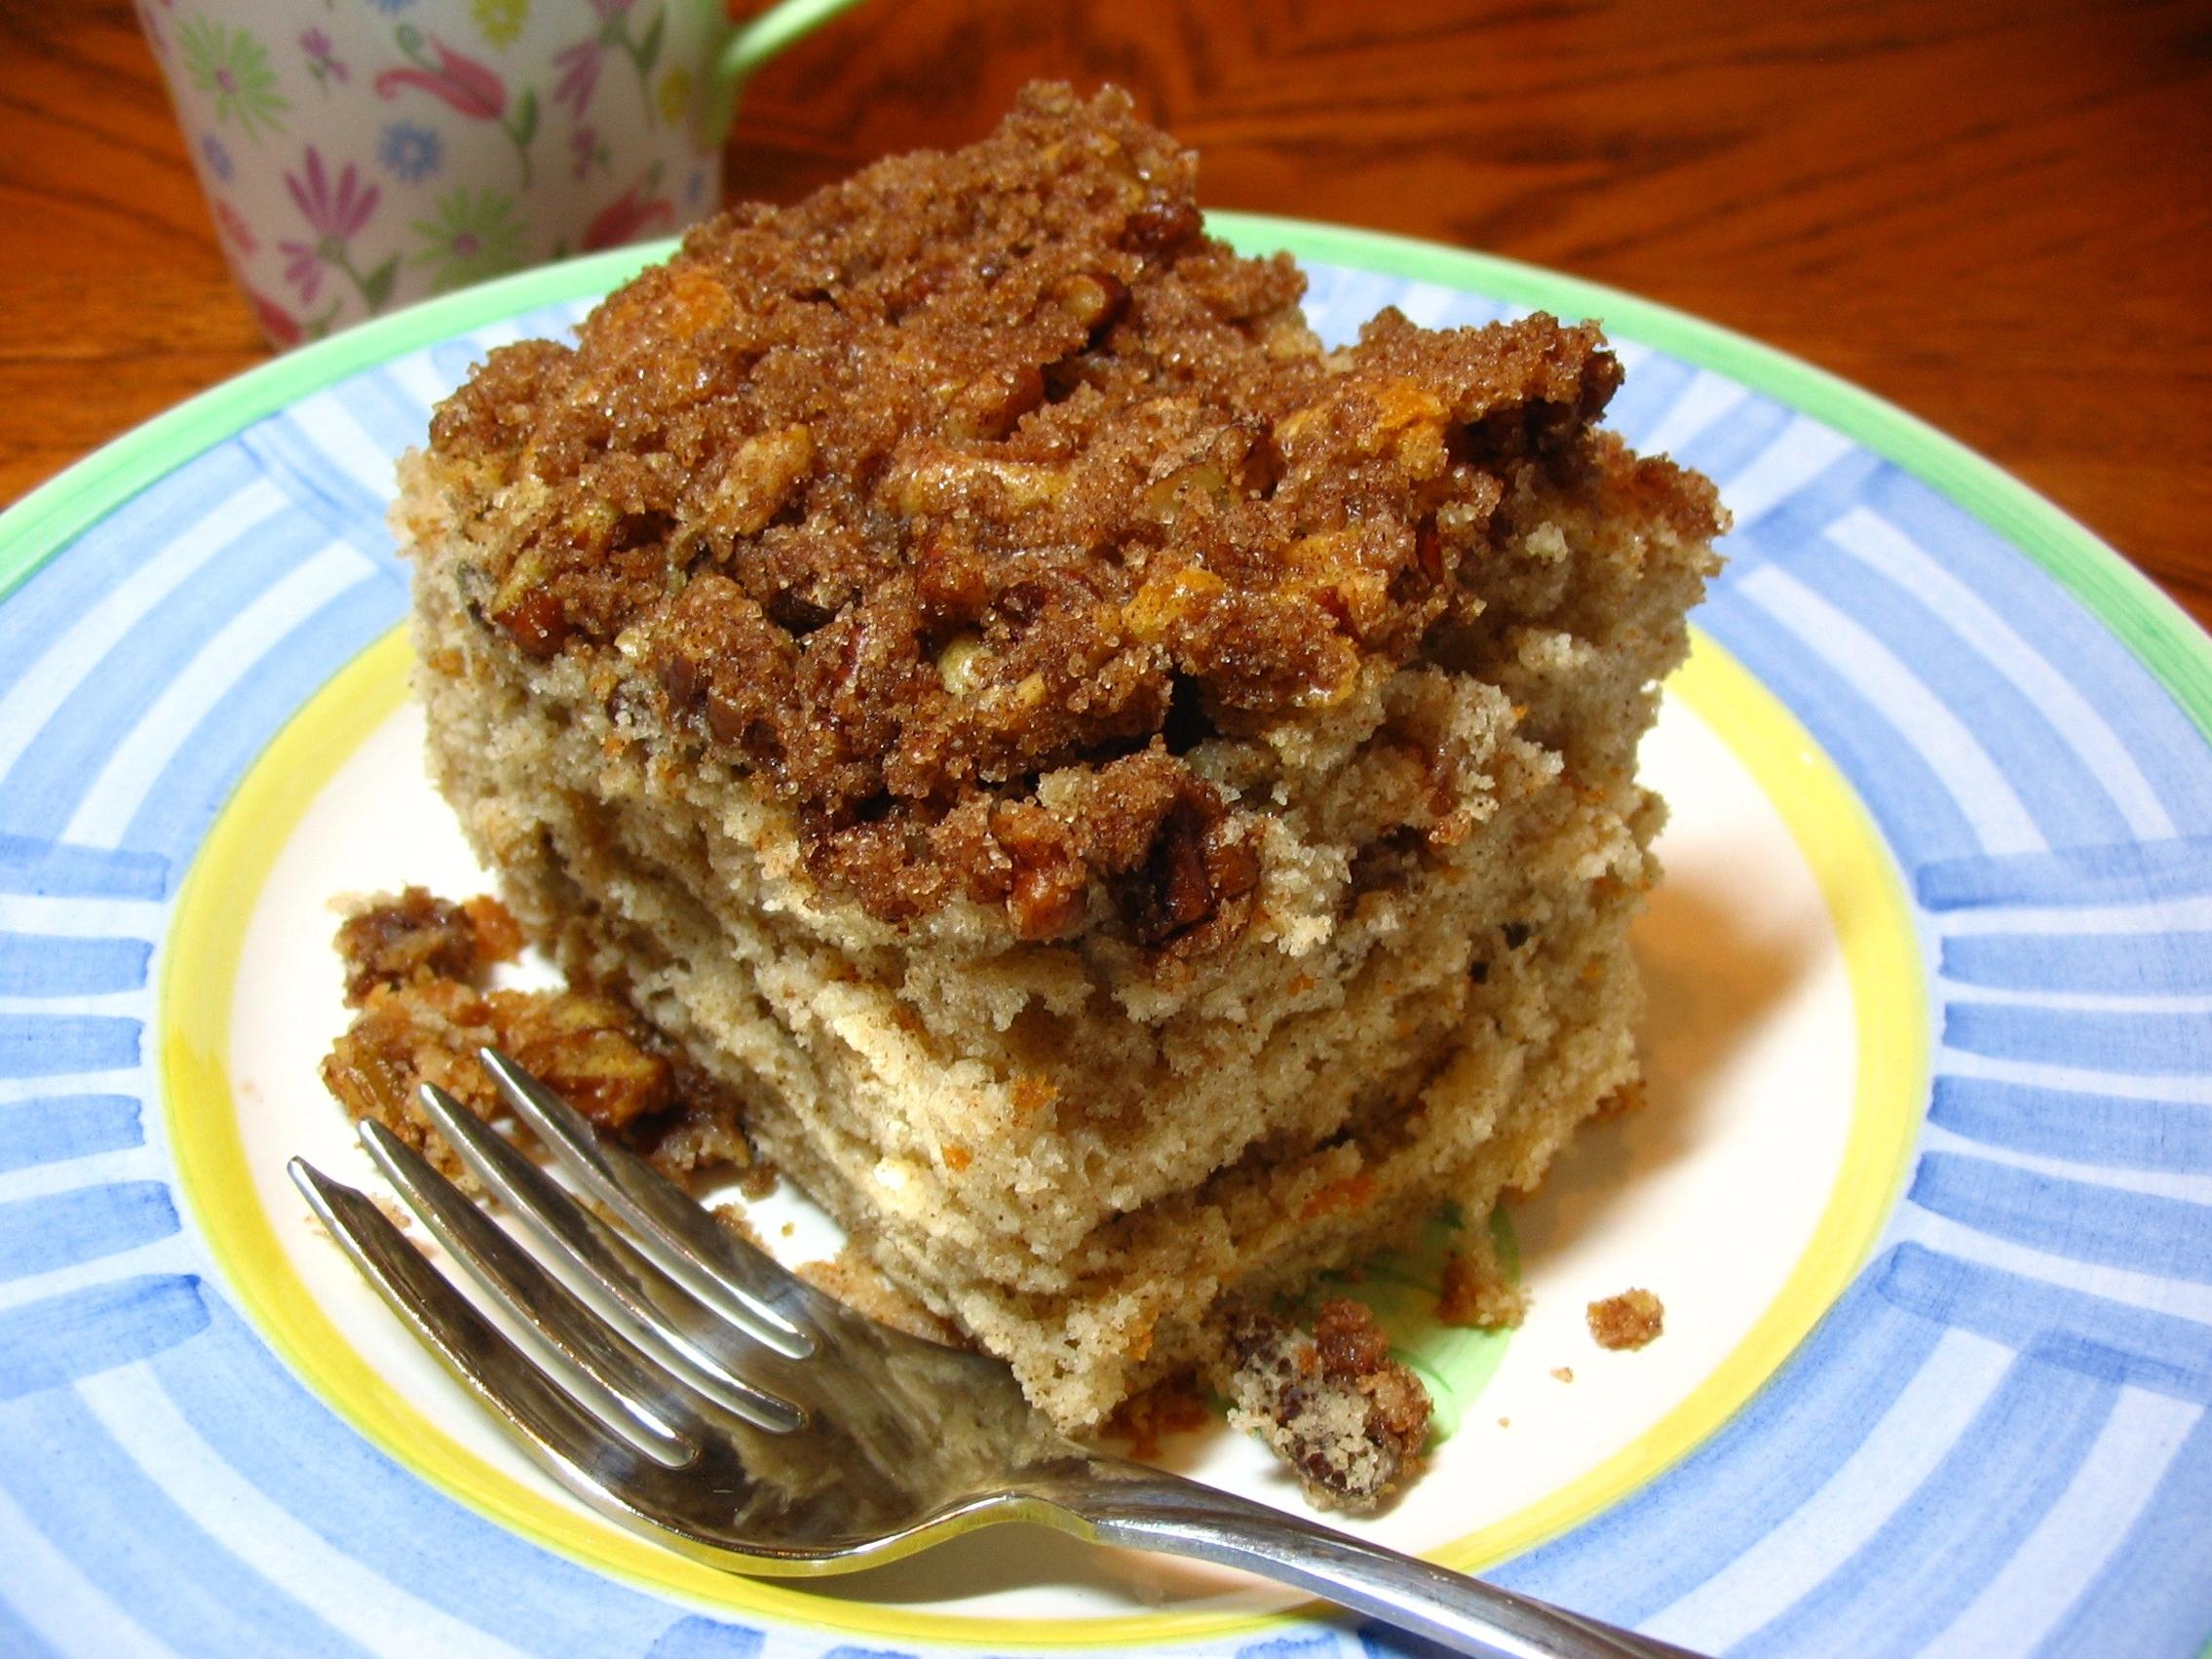  Don't worry, this coffee cake is quick and easy to make!